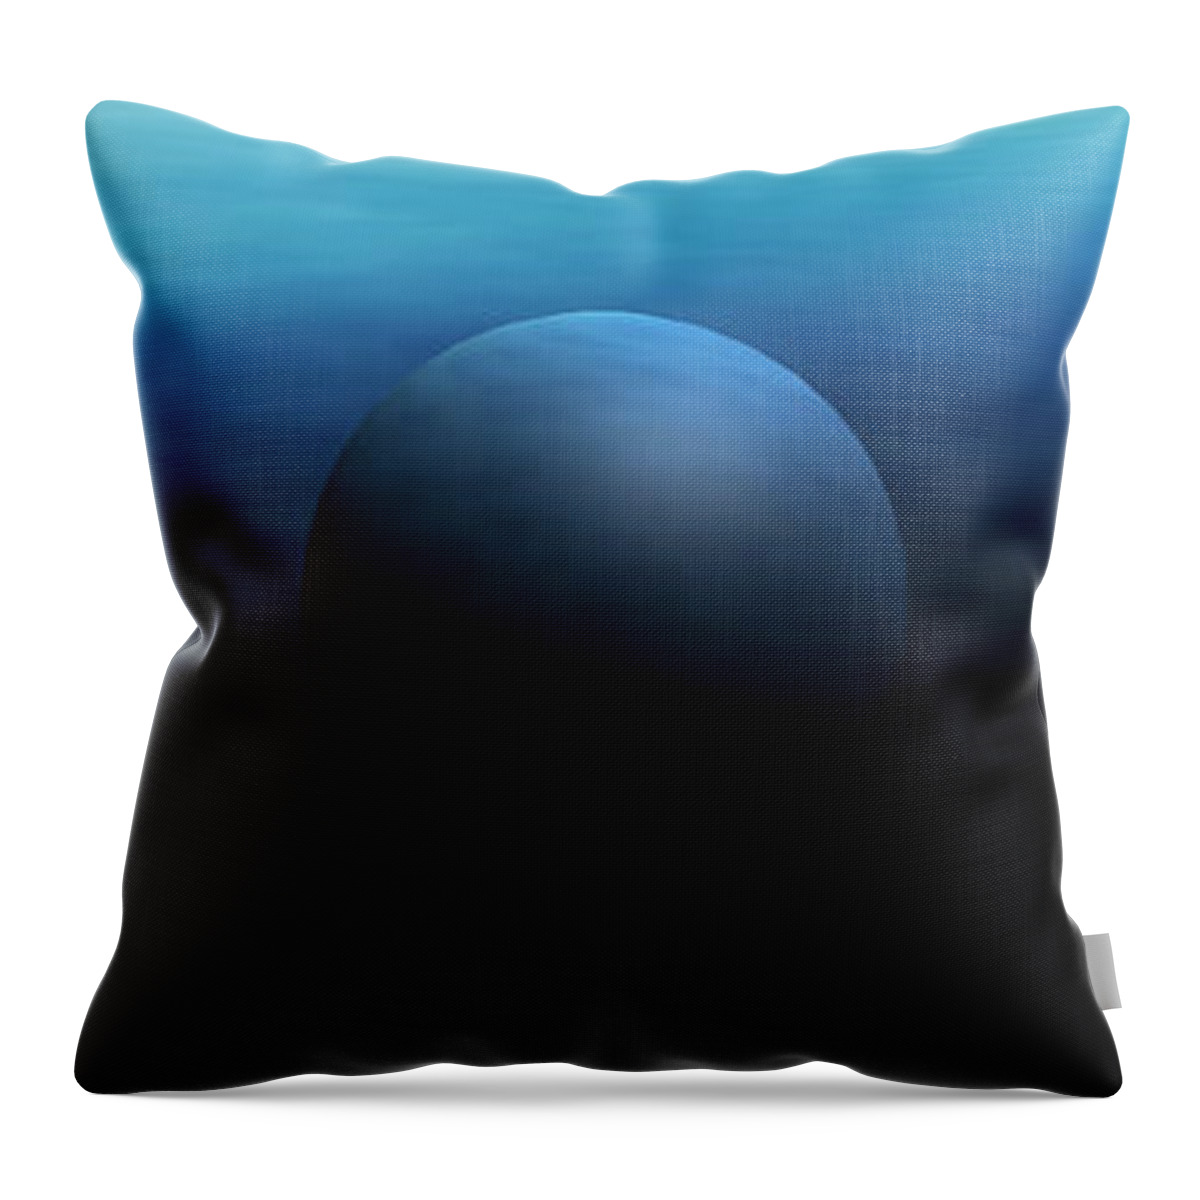 Particles Throw Pillow featuring the digital art Sand Sphere by Pelo Blanco Photo